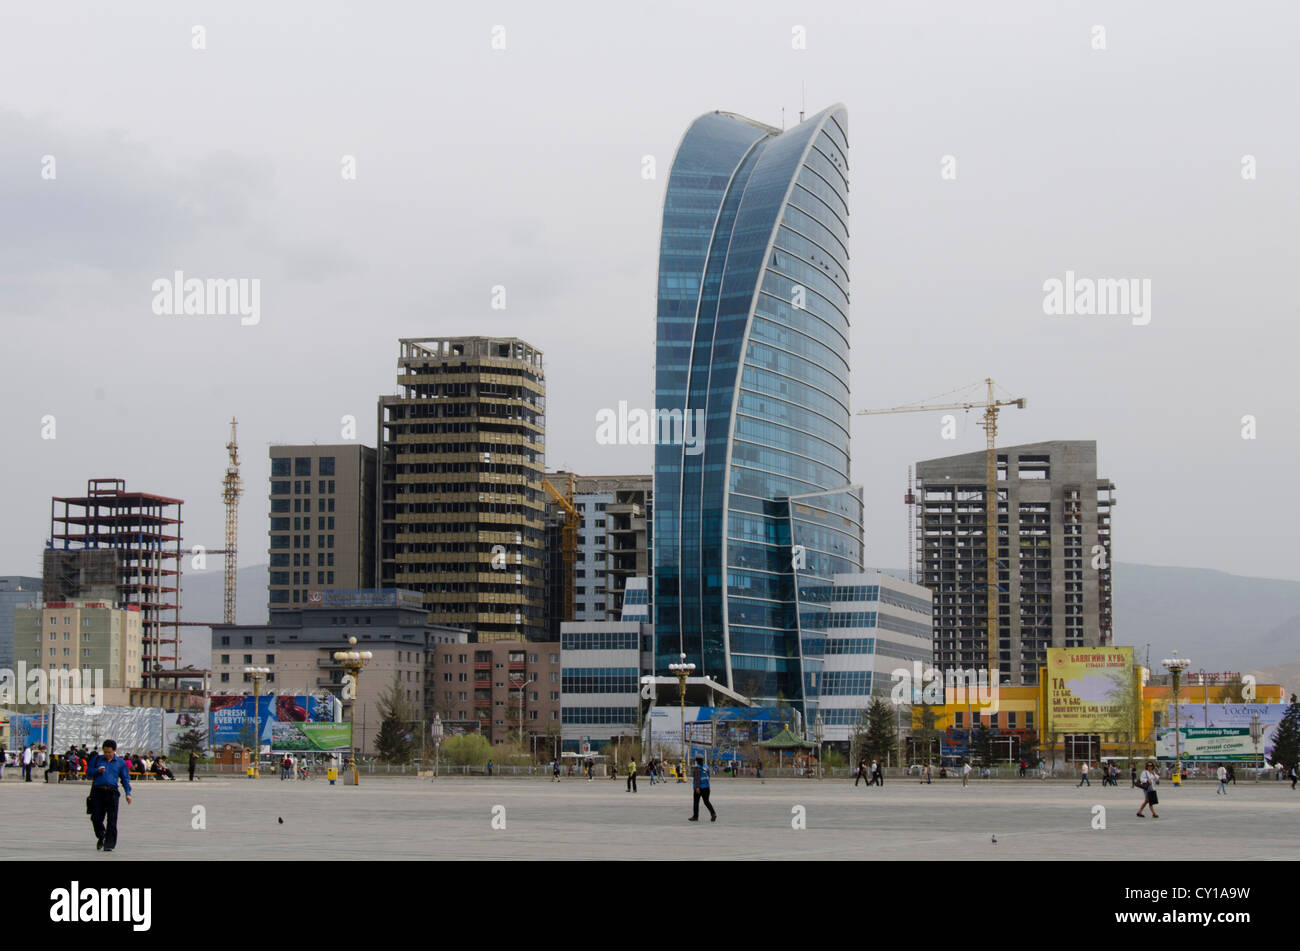 Blue Sky Hotel and other high rise buildings, Ulaan Bataar, Mongolia Stock Photo